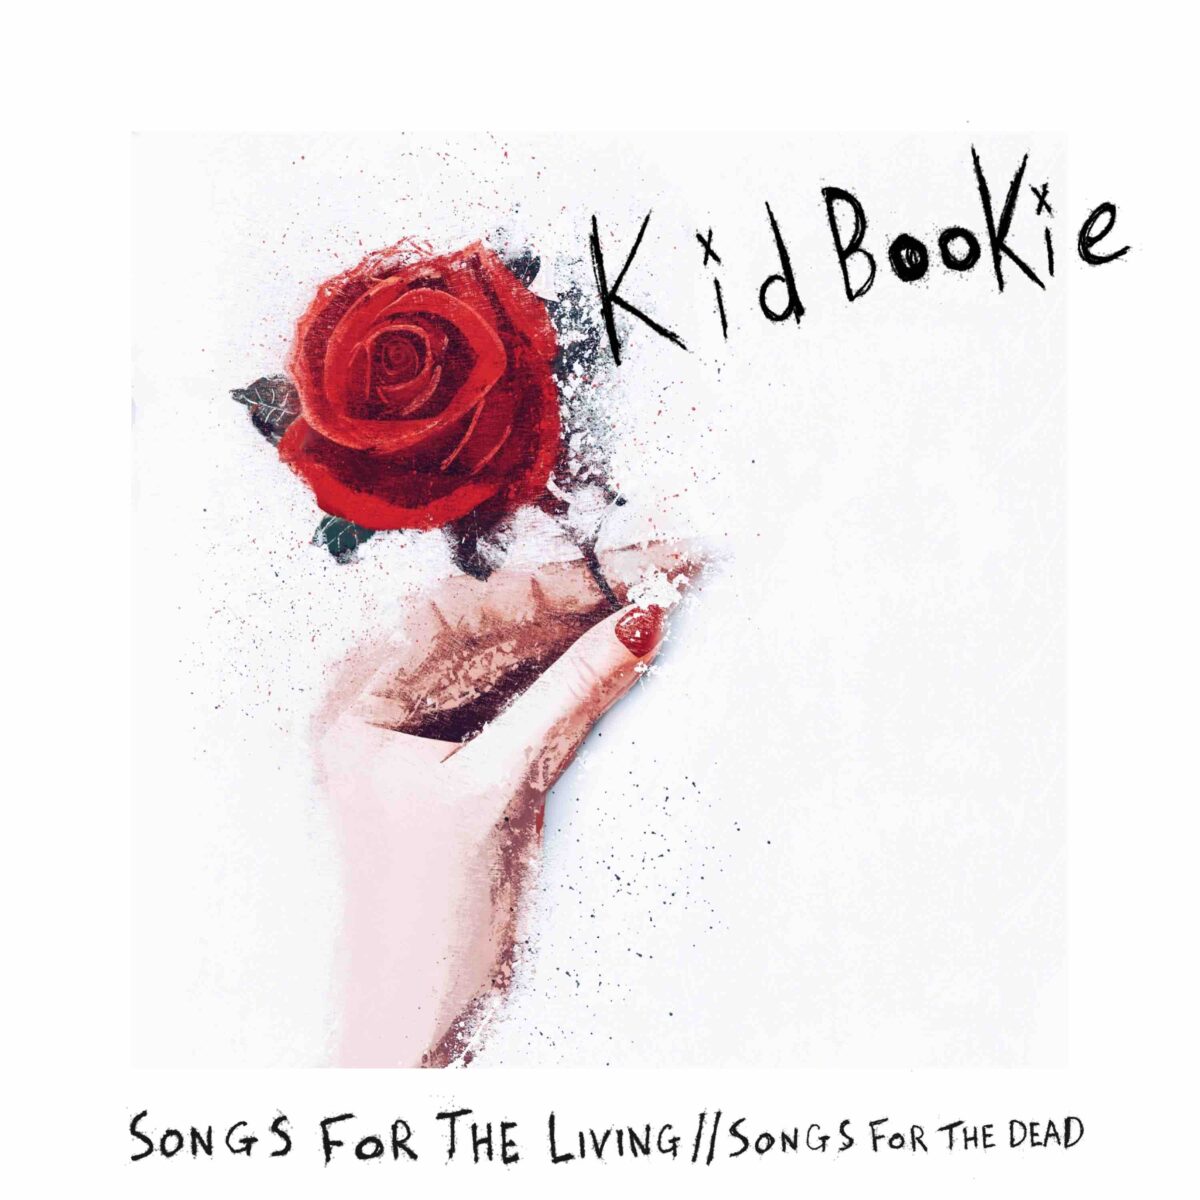 Kid-Bookie-songs-for-the-living-songs-for-the-dead